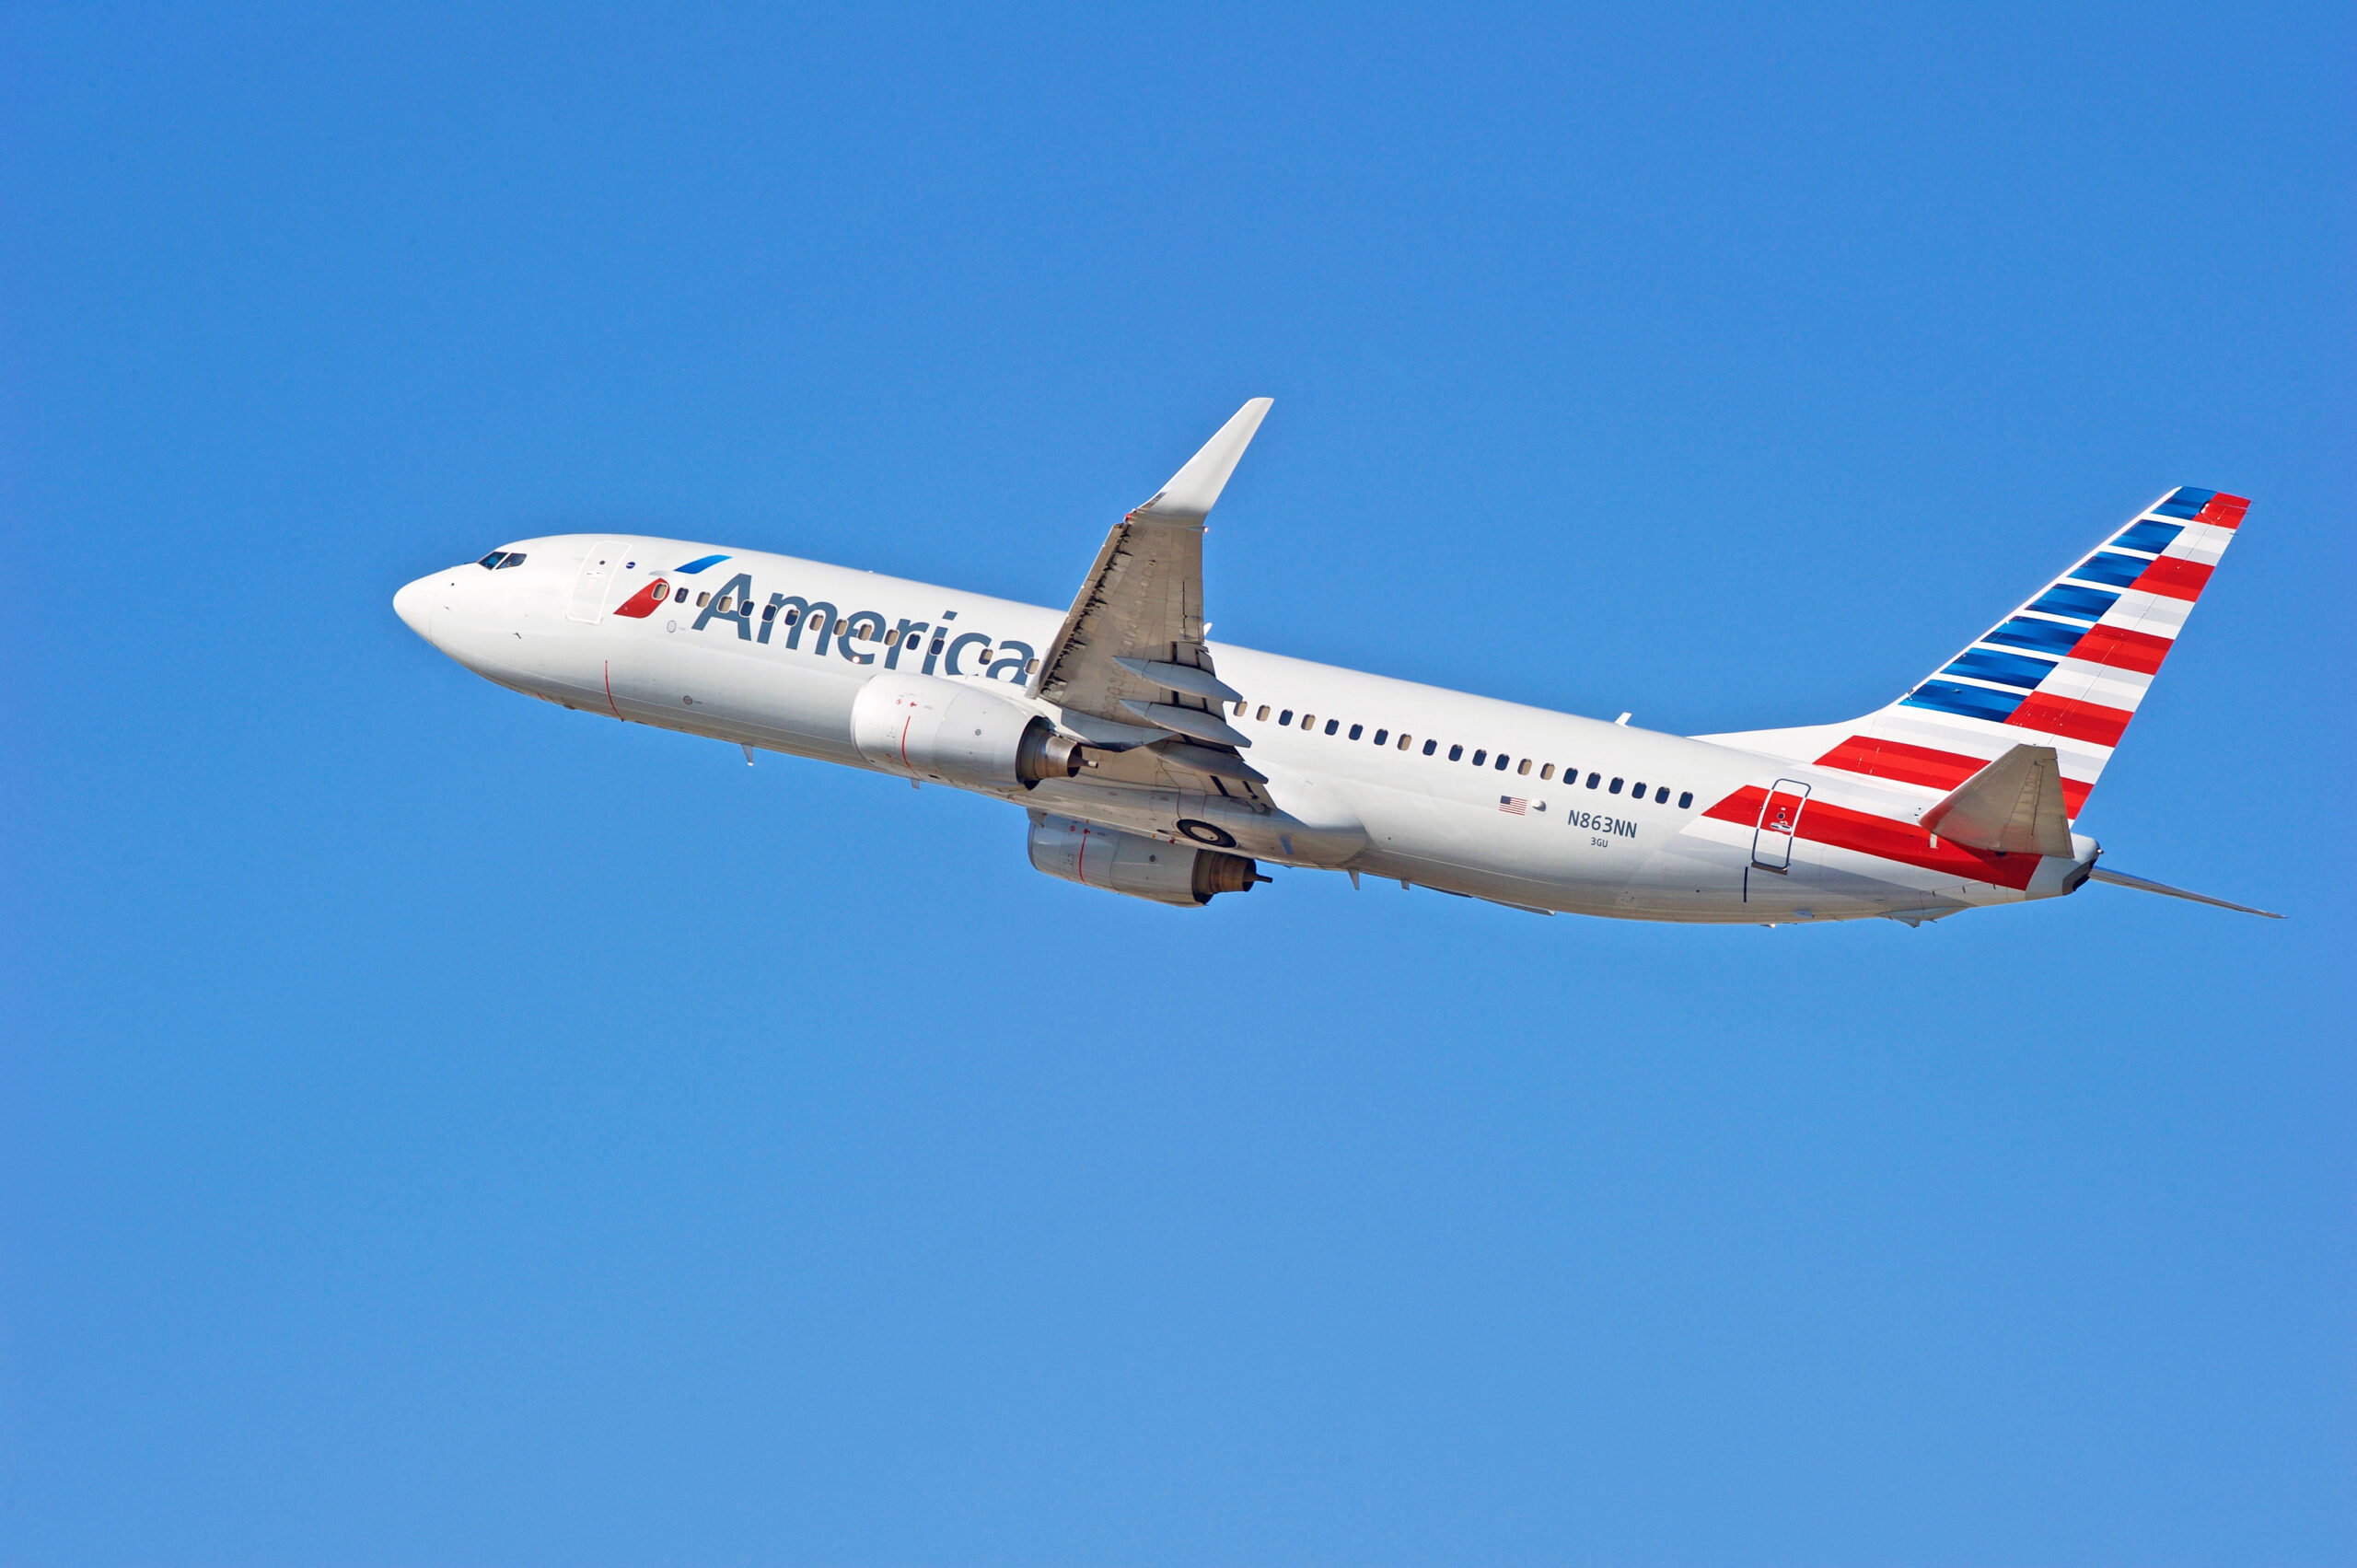 Is American Airlines stock a buy post Q3 earnings report